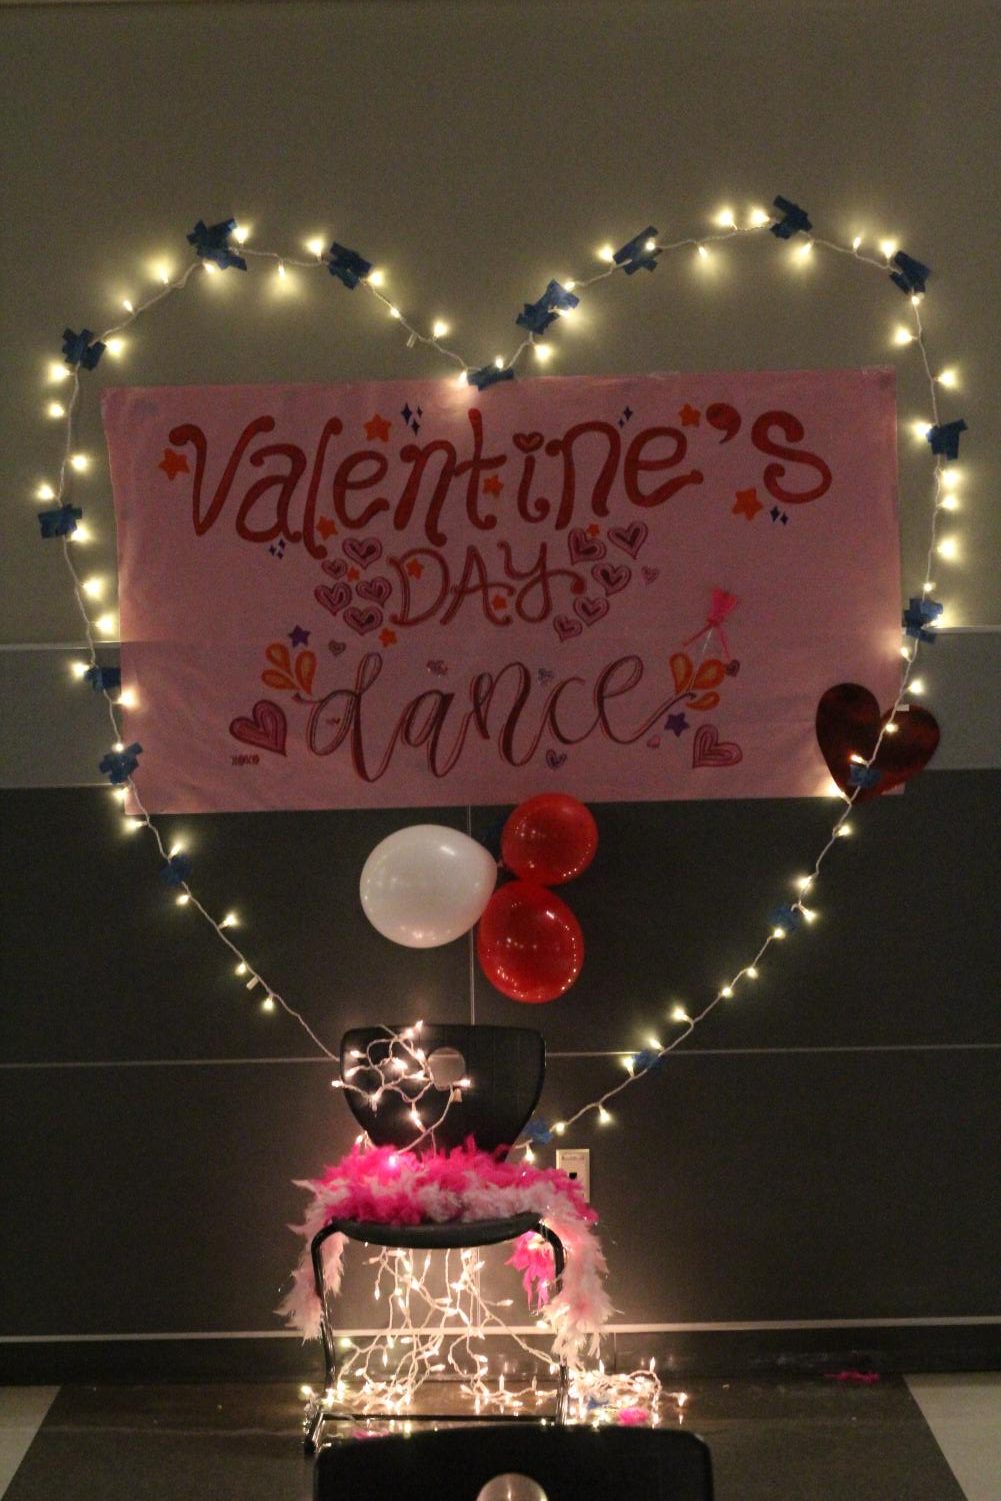 Student+Council+Holds+Annual+District+Valentines+Dance